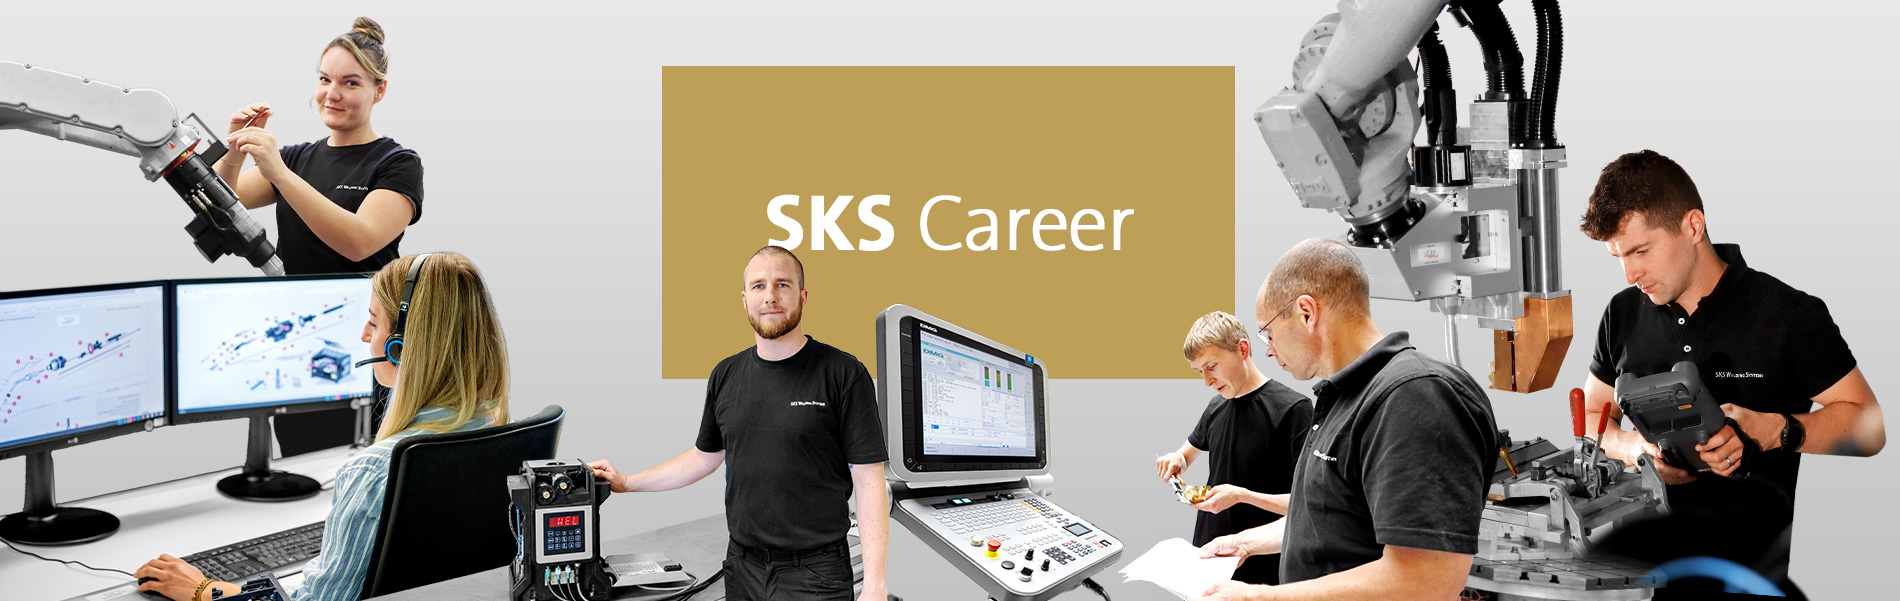 Working at SKS